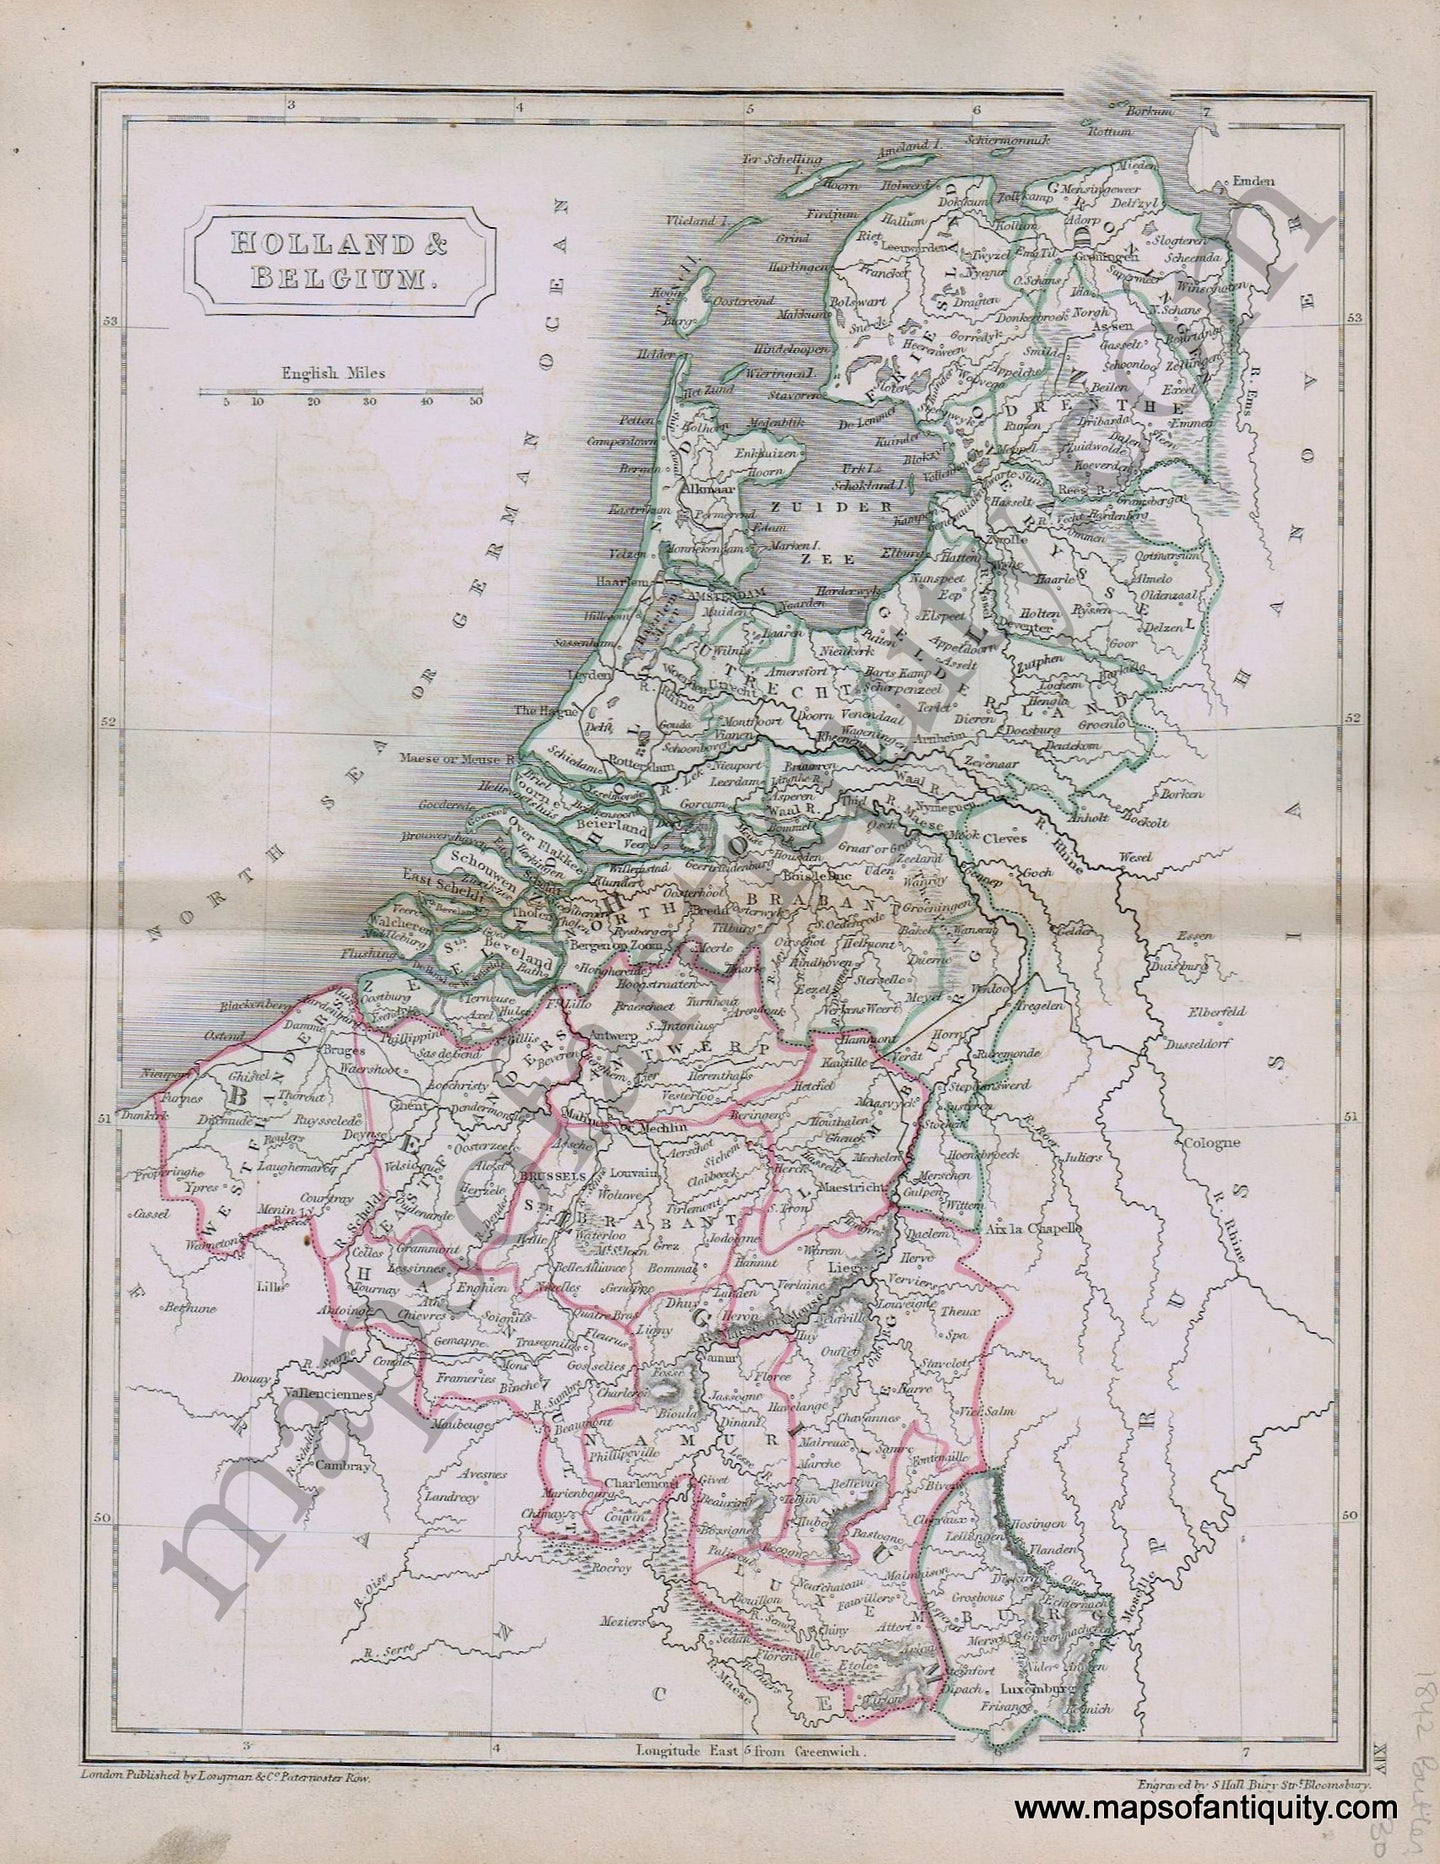 Antique-Hand-Colored-Map-Holland-&-Belgium-1842-Butler-Holland-&-The-Netherlands-1800s-19th-century-Maps-of-Antiquity